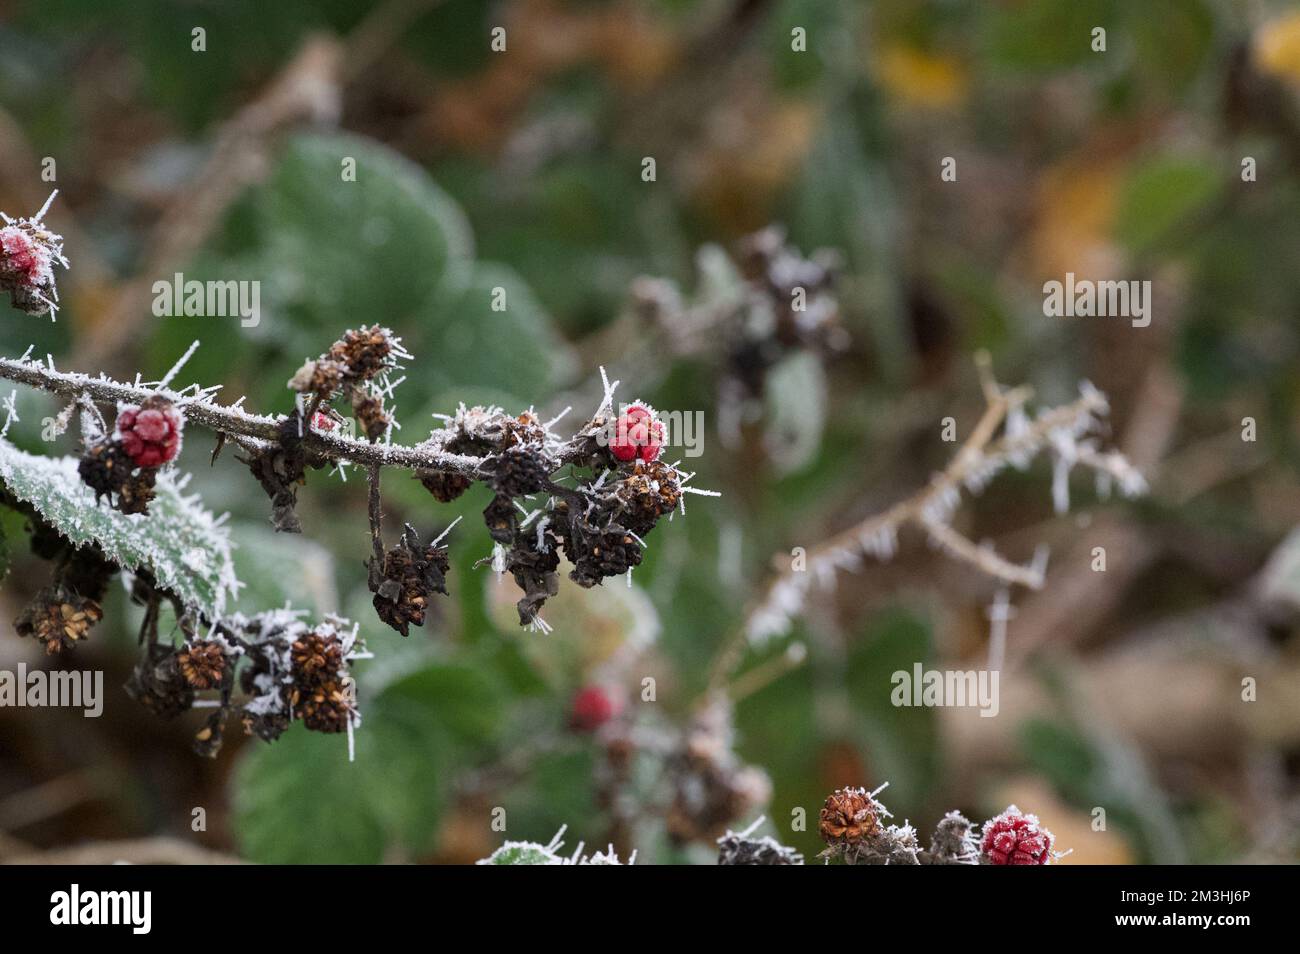 A branch of bramble: blackberry bush (Rubus fruticosus) with leaves and berries - including red fruit - covered in spiky white icicles from a heavy wi Stock Photo